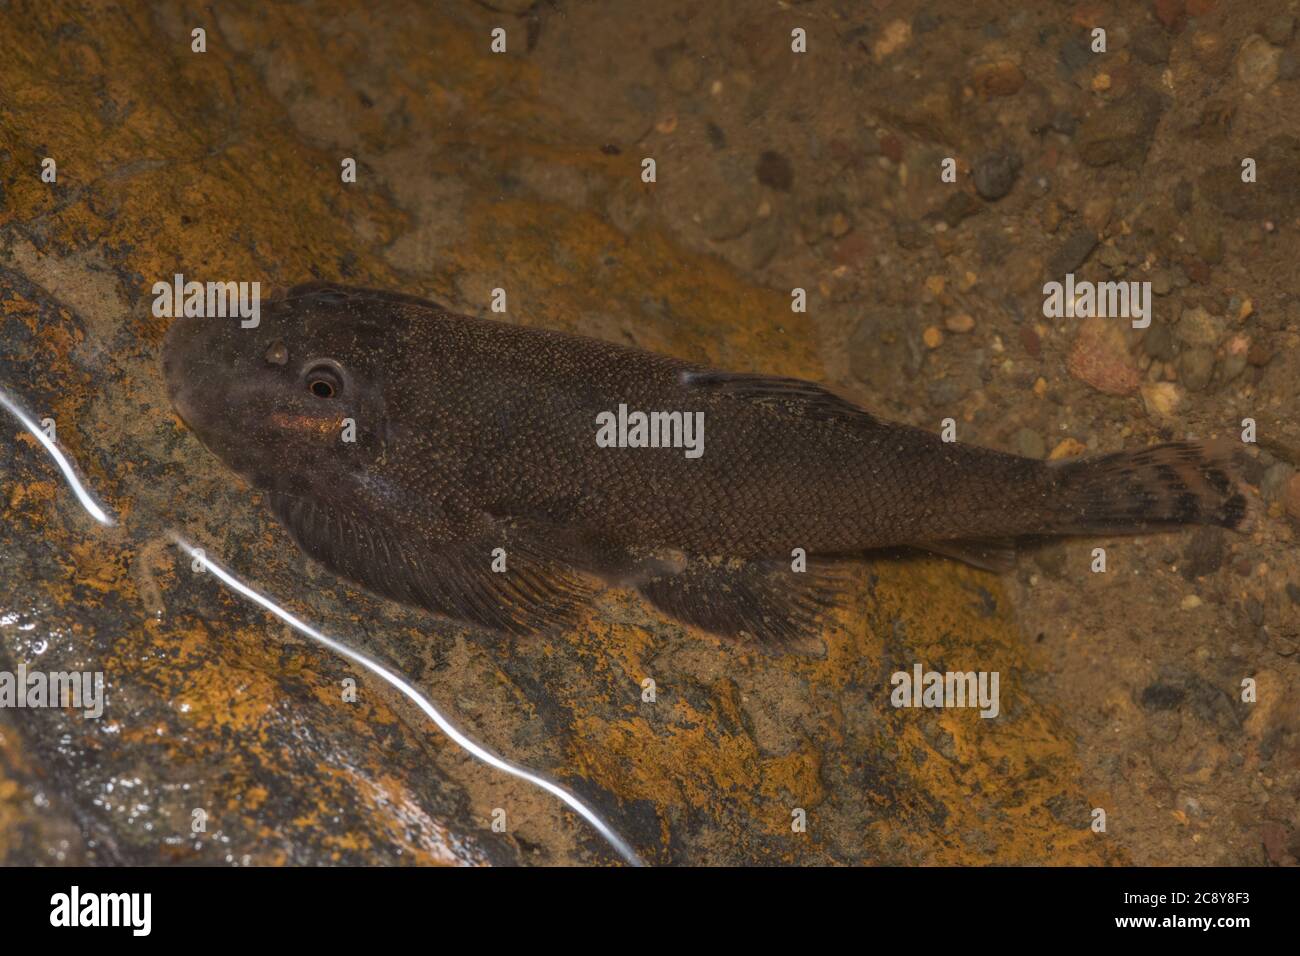 A borneo sucker fish (Gastromyzon sp) a loach adapted to living in fast flowing freshwater in the jungle, the entire genus is endemic to borneo. Stock Photo